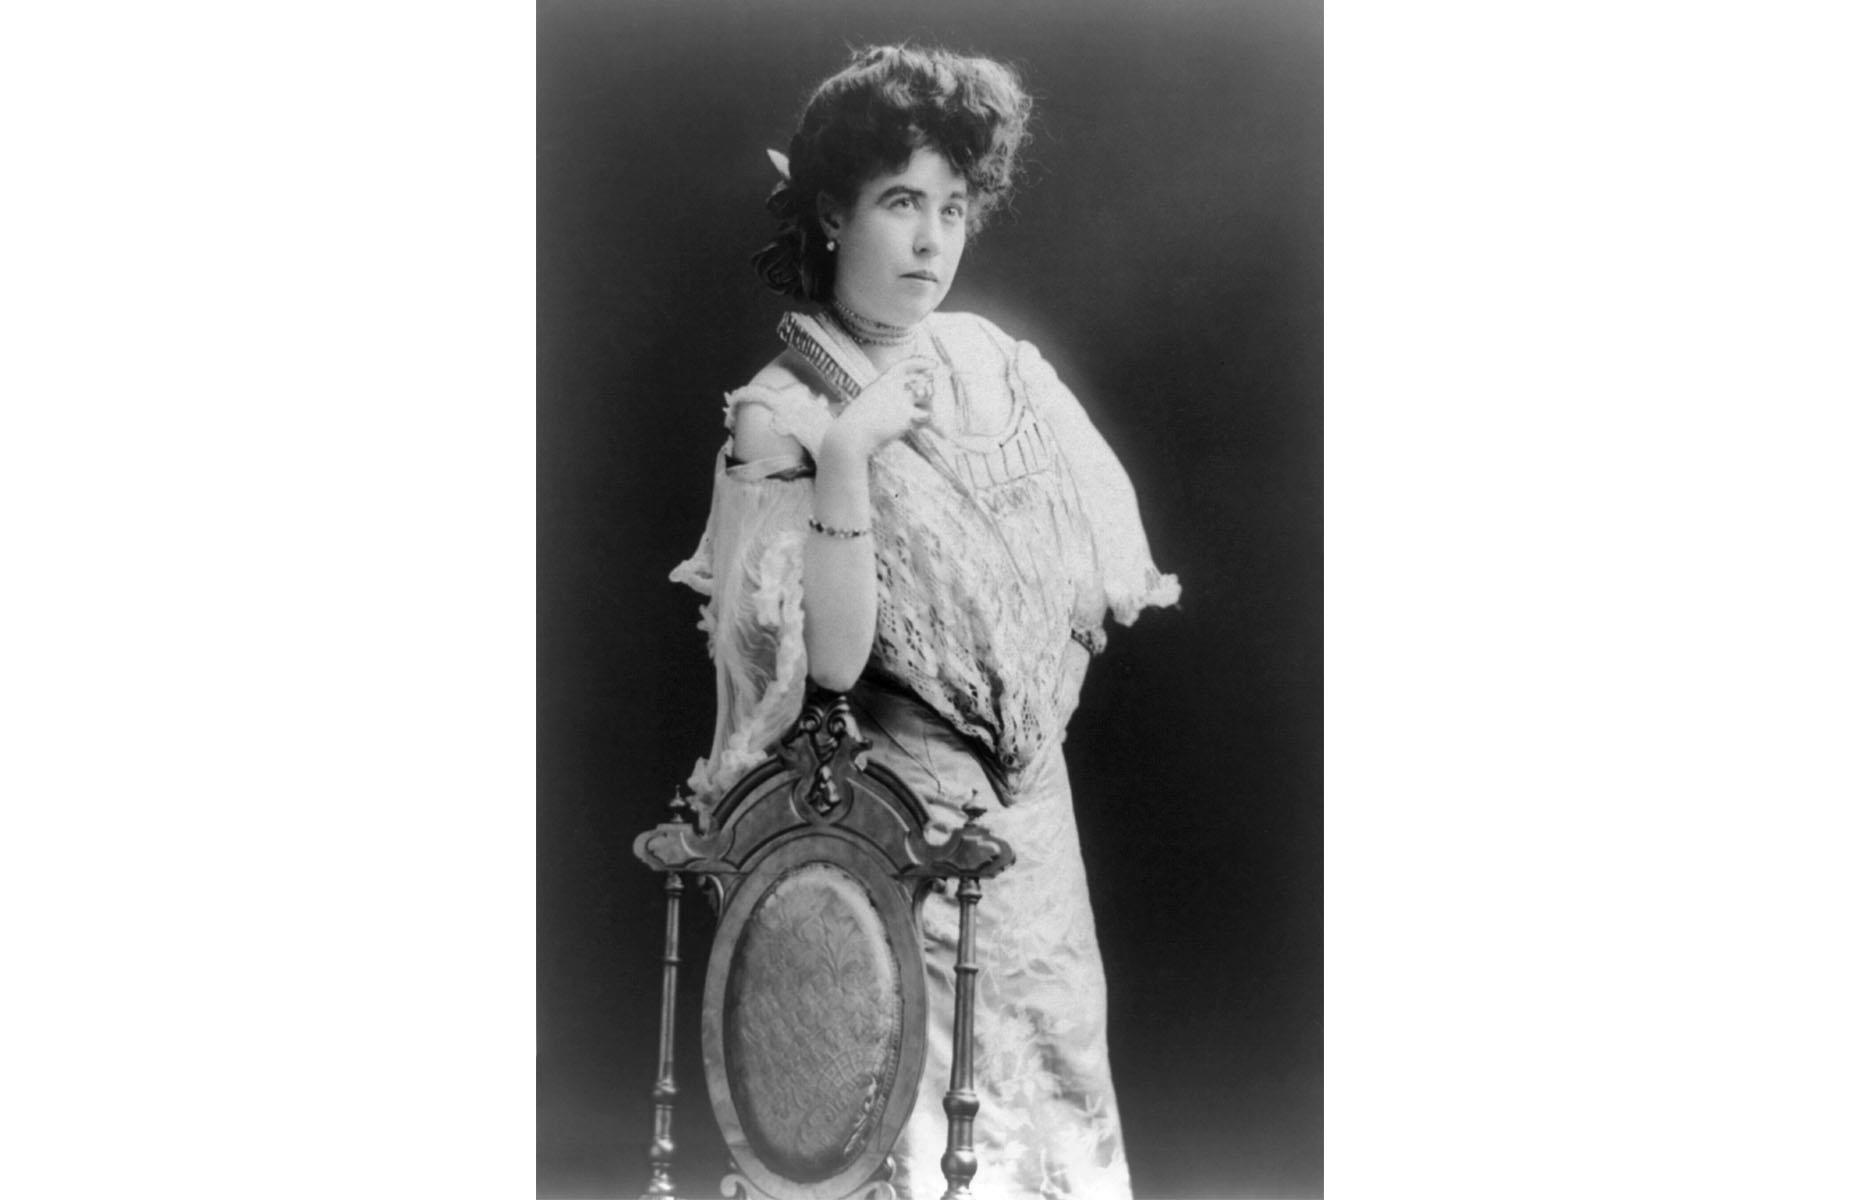 Titanic’s first-class passengers, such as American socialite Molly Brown (pictured), expected the best and would feast like royalty every day. These rich and often celebrated guests could easily afford first class, a ticket for which cost between £30 (around $3,500/£2,700 today) and £870 ($100,000/£76,000 today). As was the fashion in upper-class circles, the food was French with some classic British and American dishes.